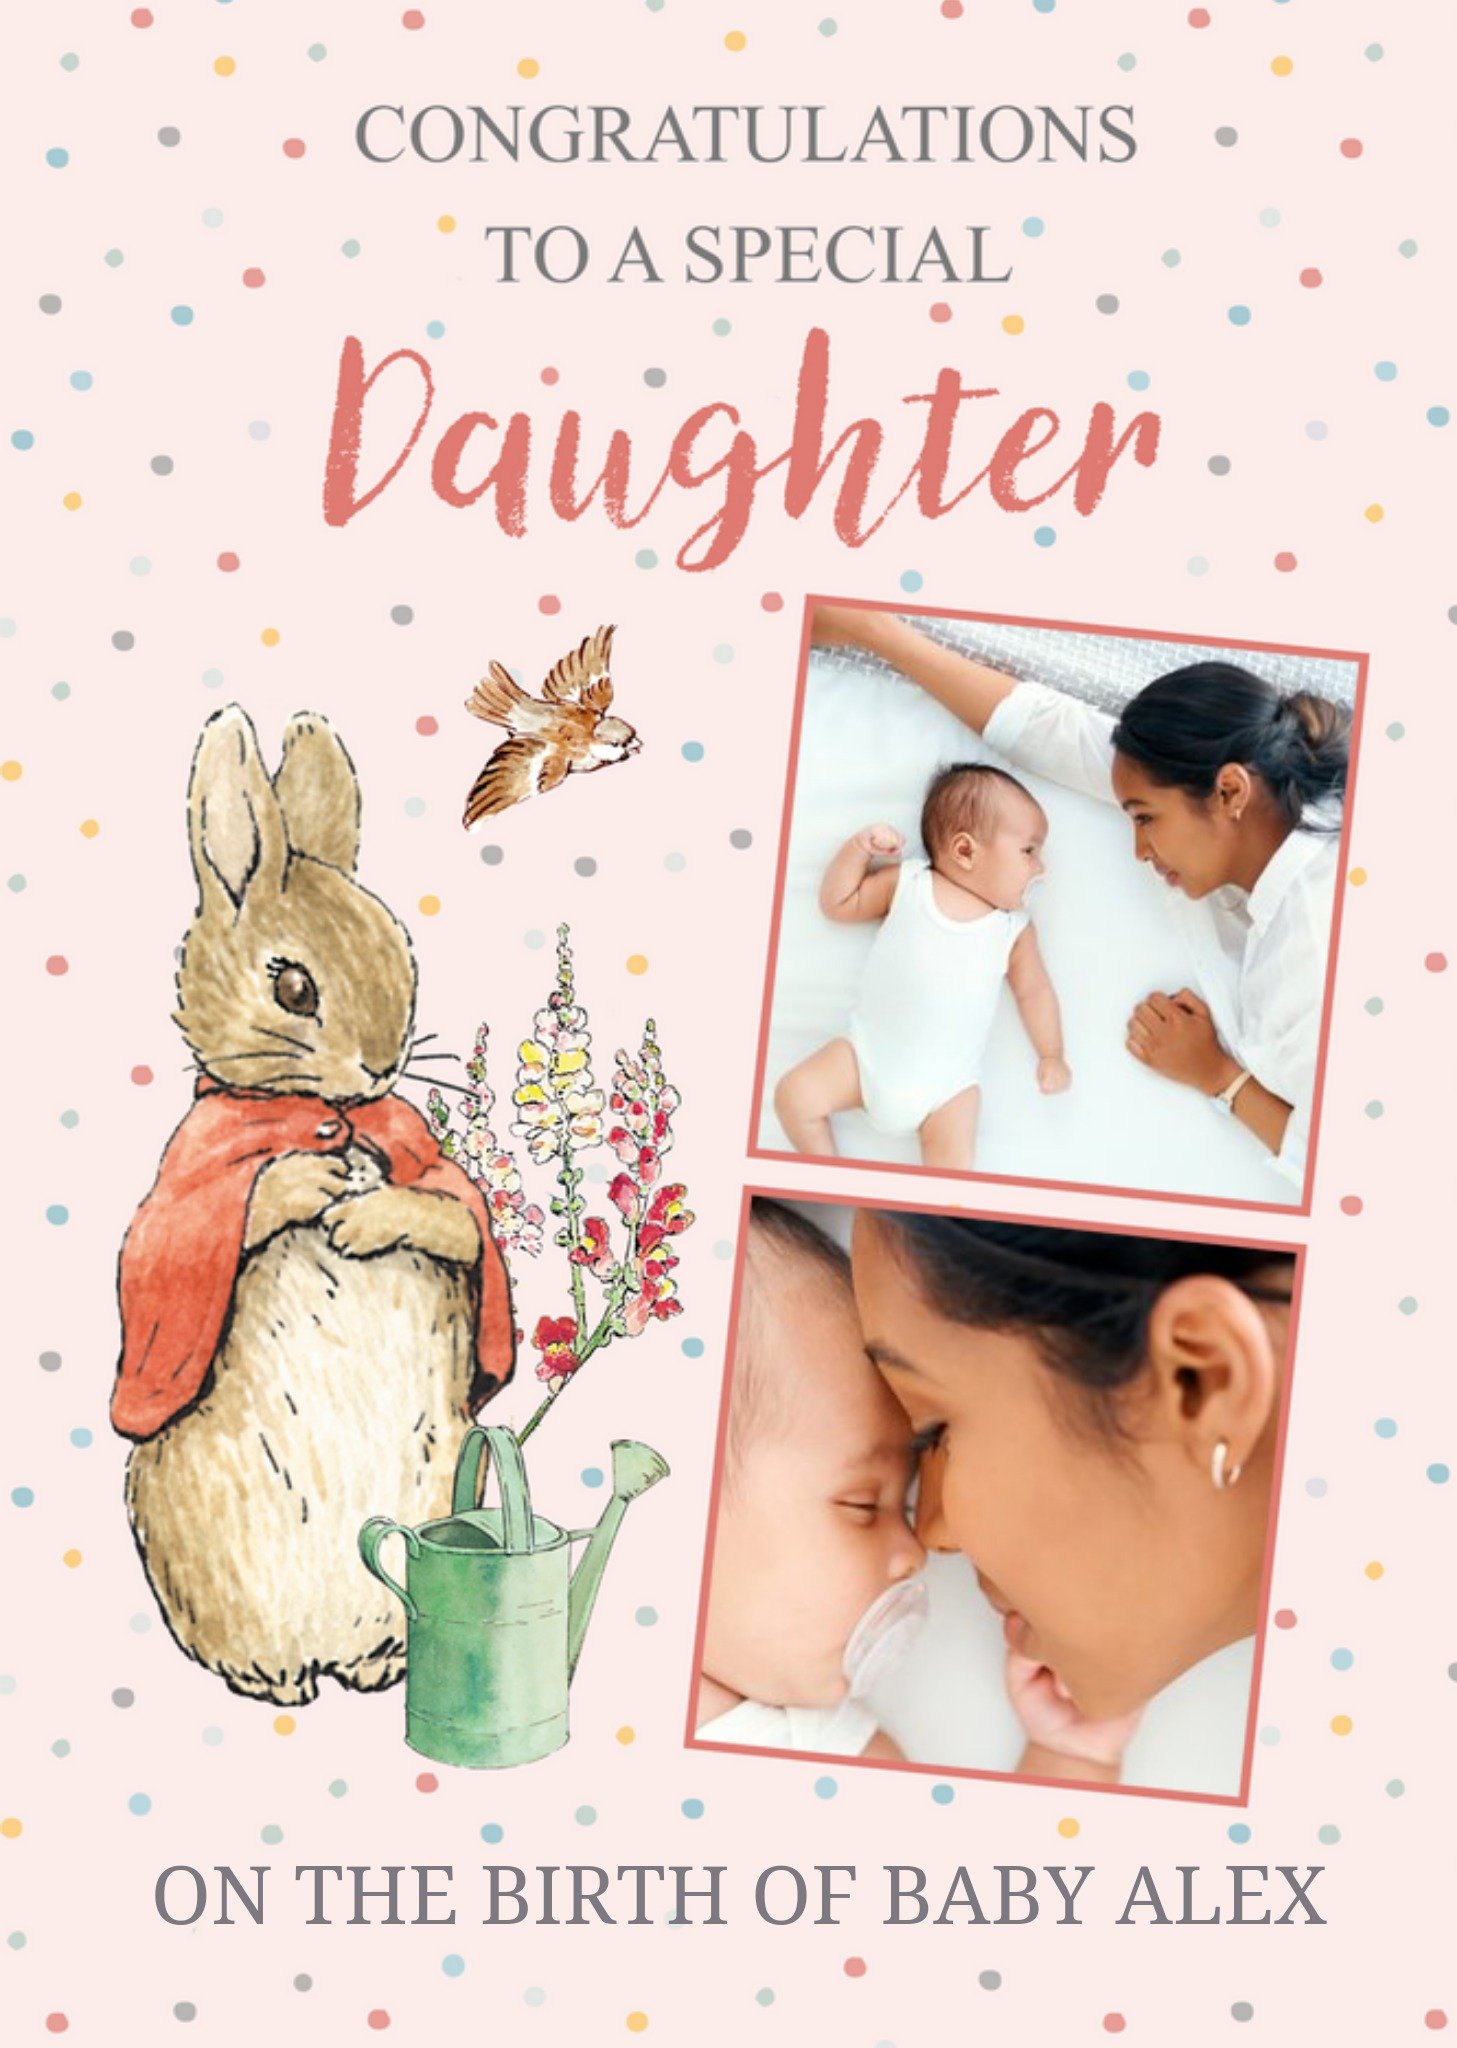 Peter Rabbit Congratulations To A Special Daughter Photo Upload New Baby Card, Large